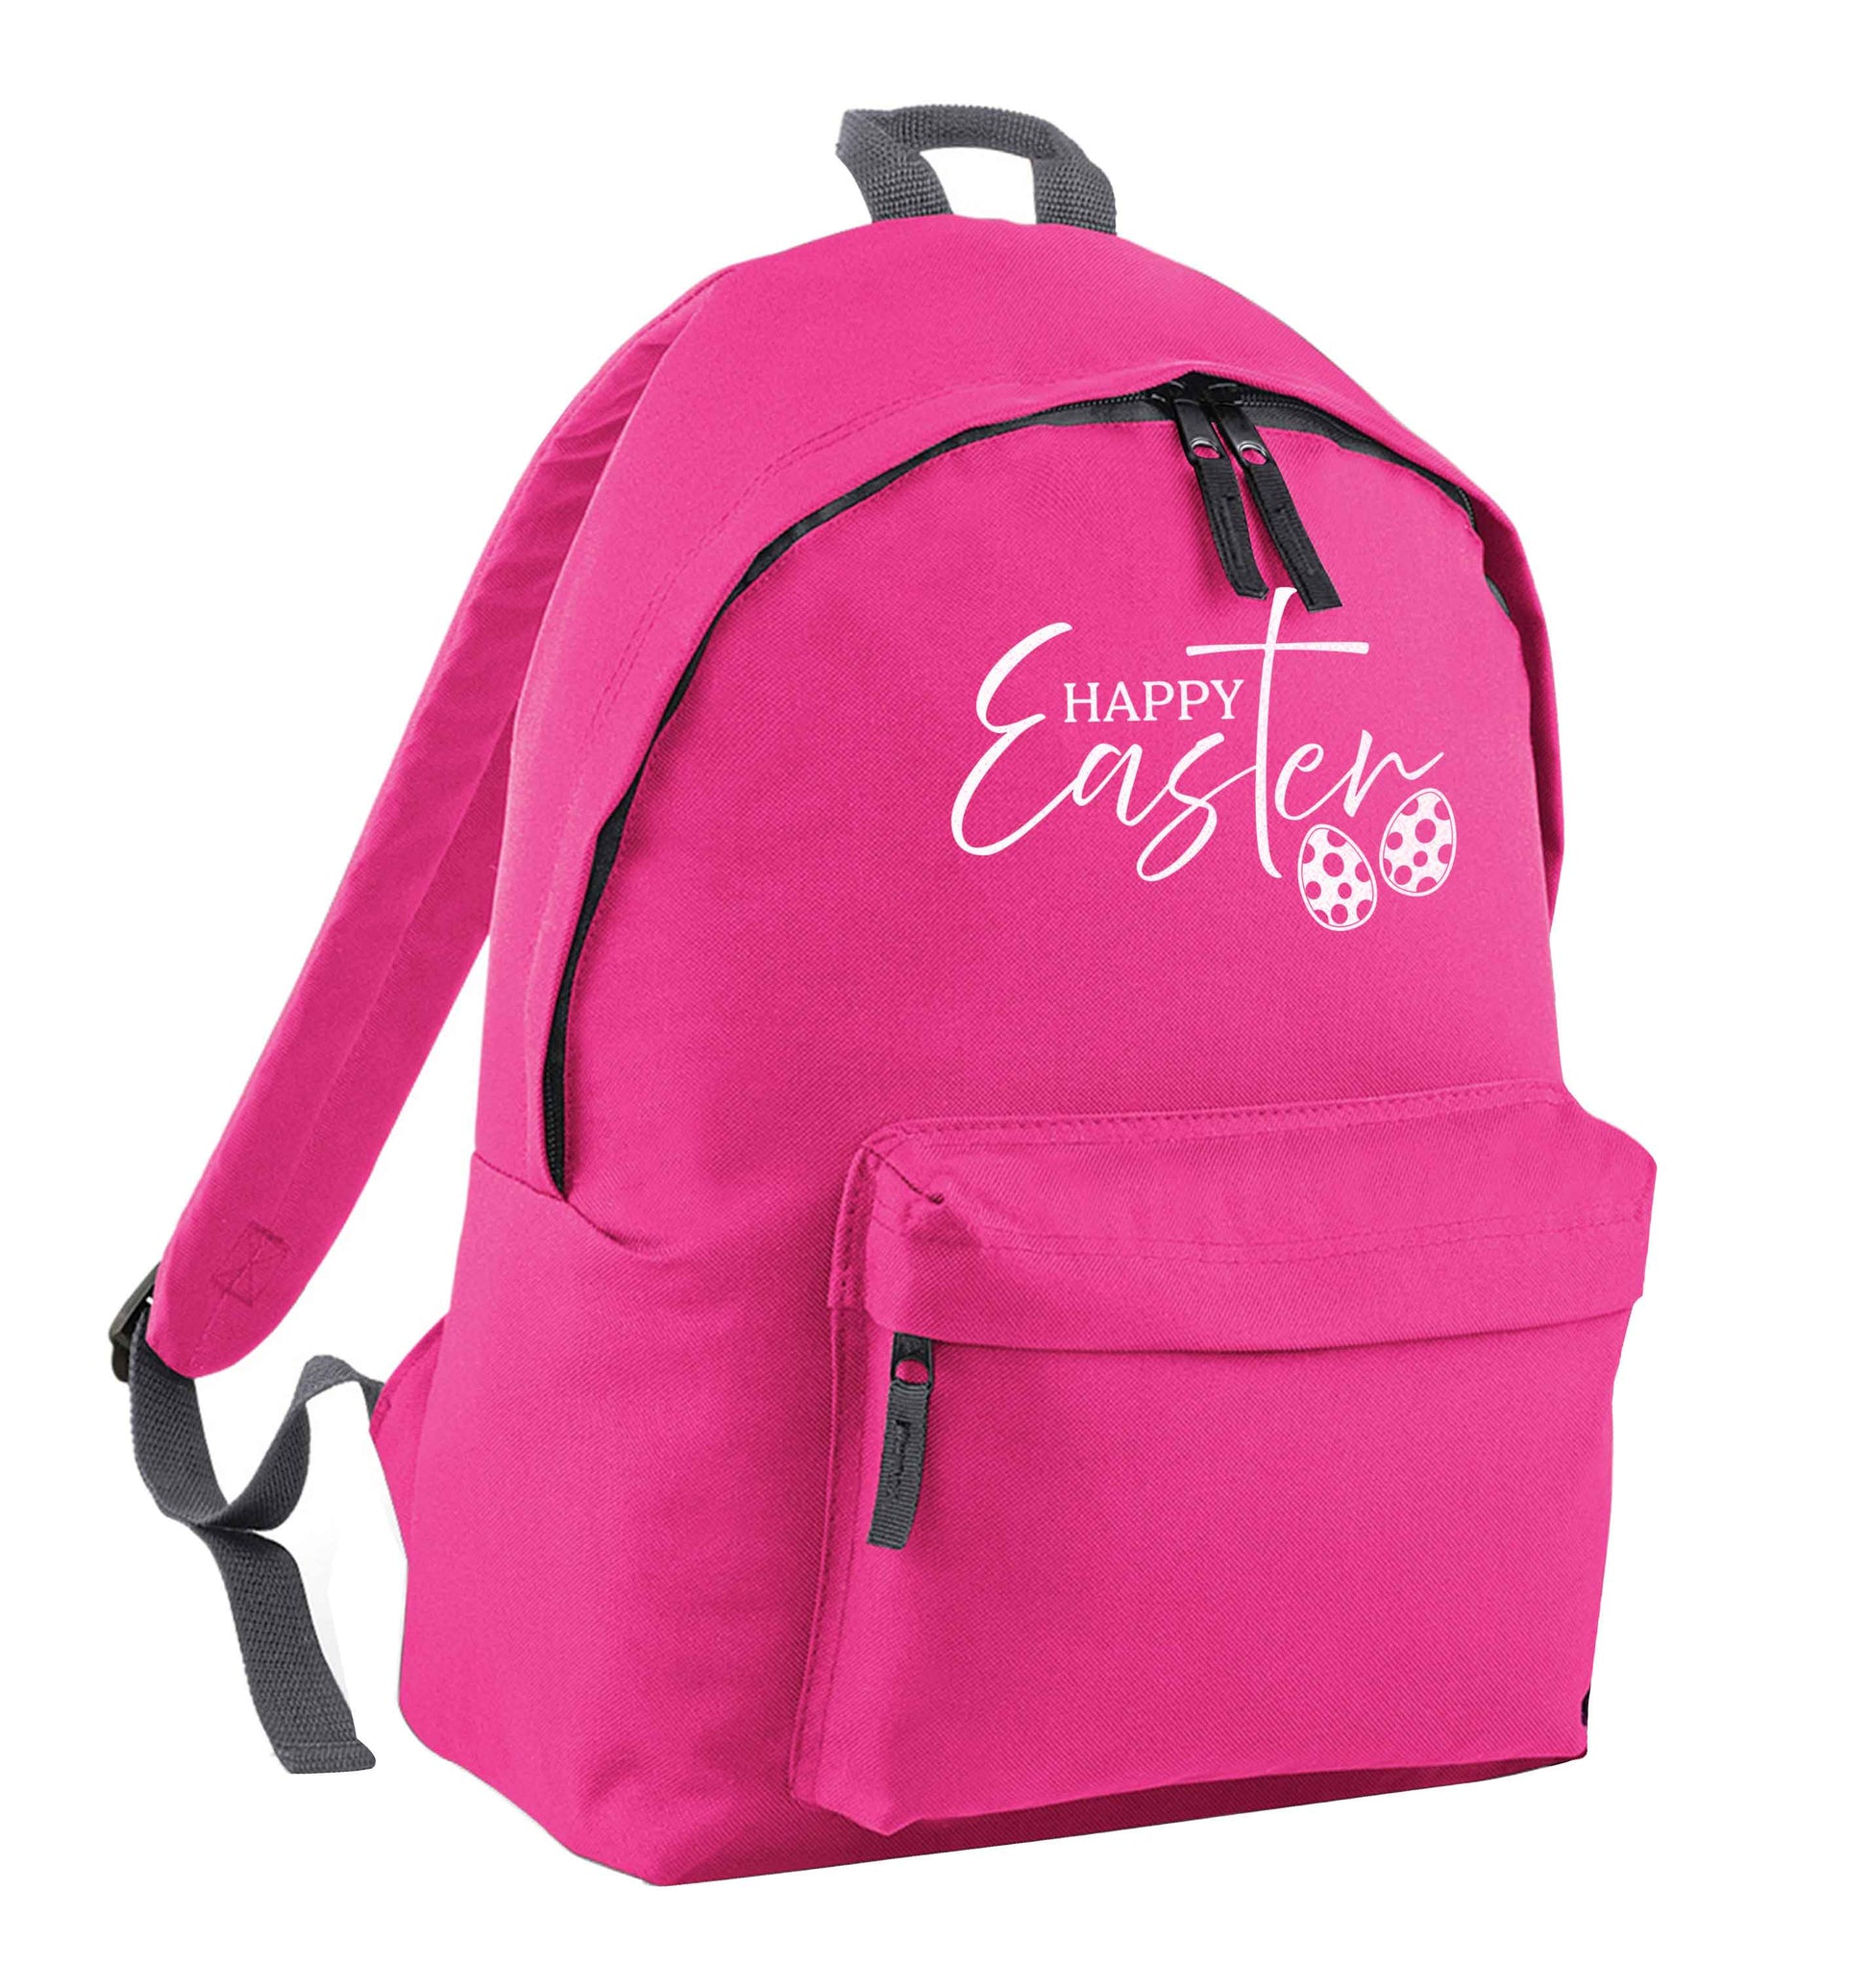 Happy Easter pink adults backpack